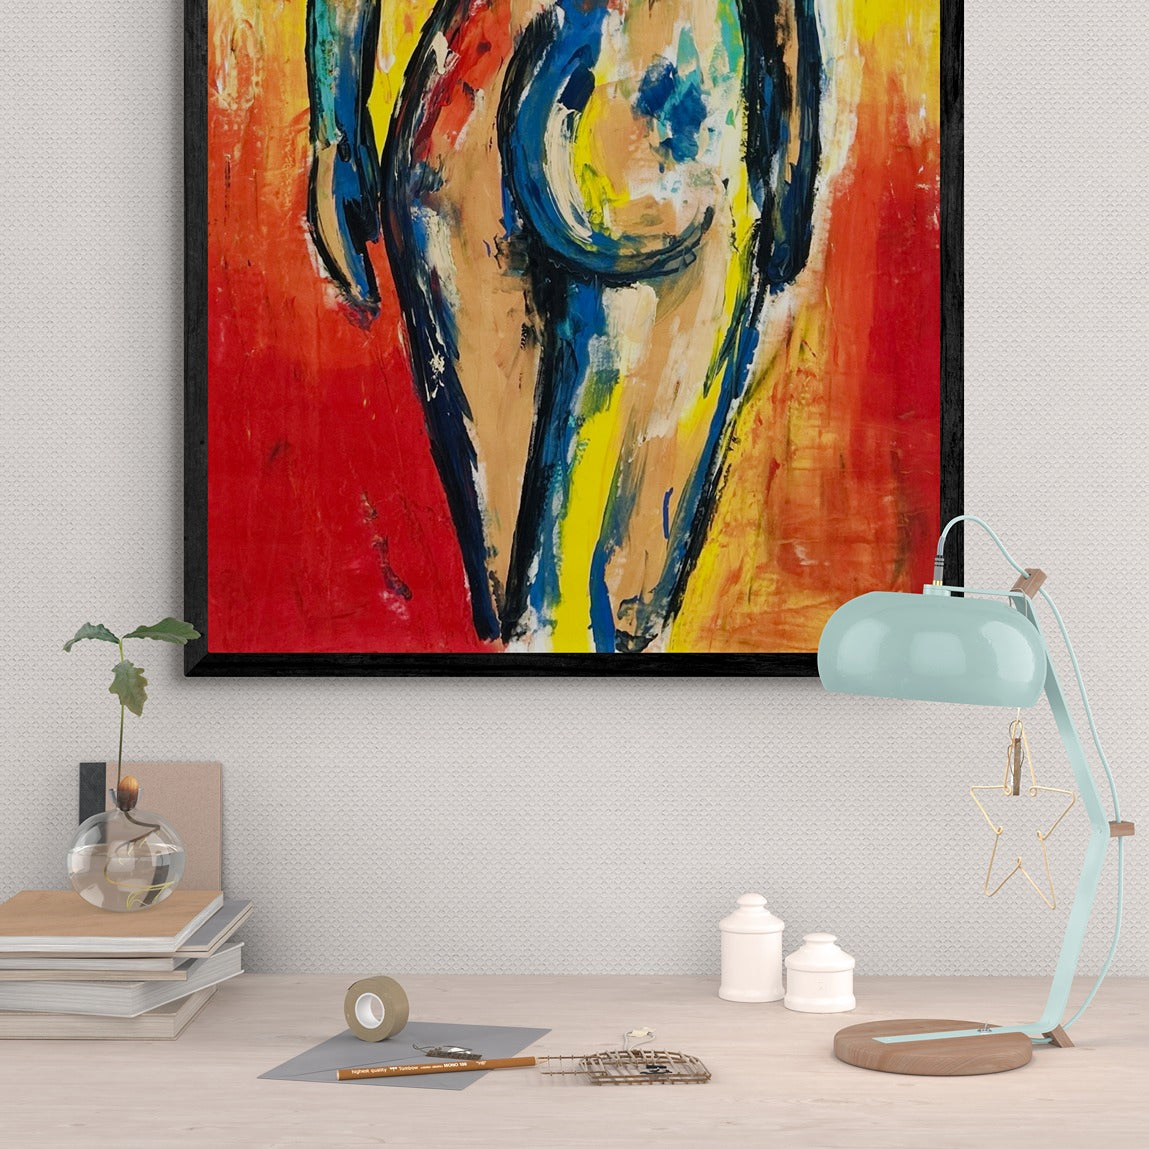 Large original hand painted wall art abstract decorating adesk work area with a colorful lamp